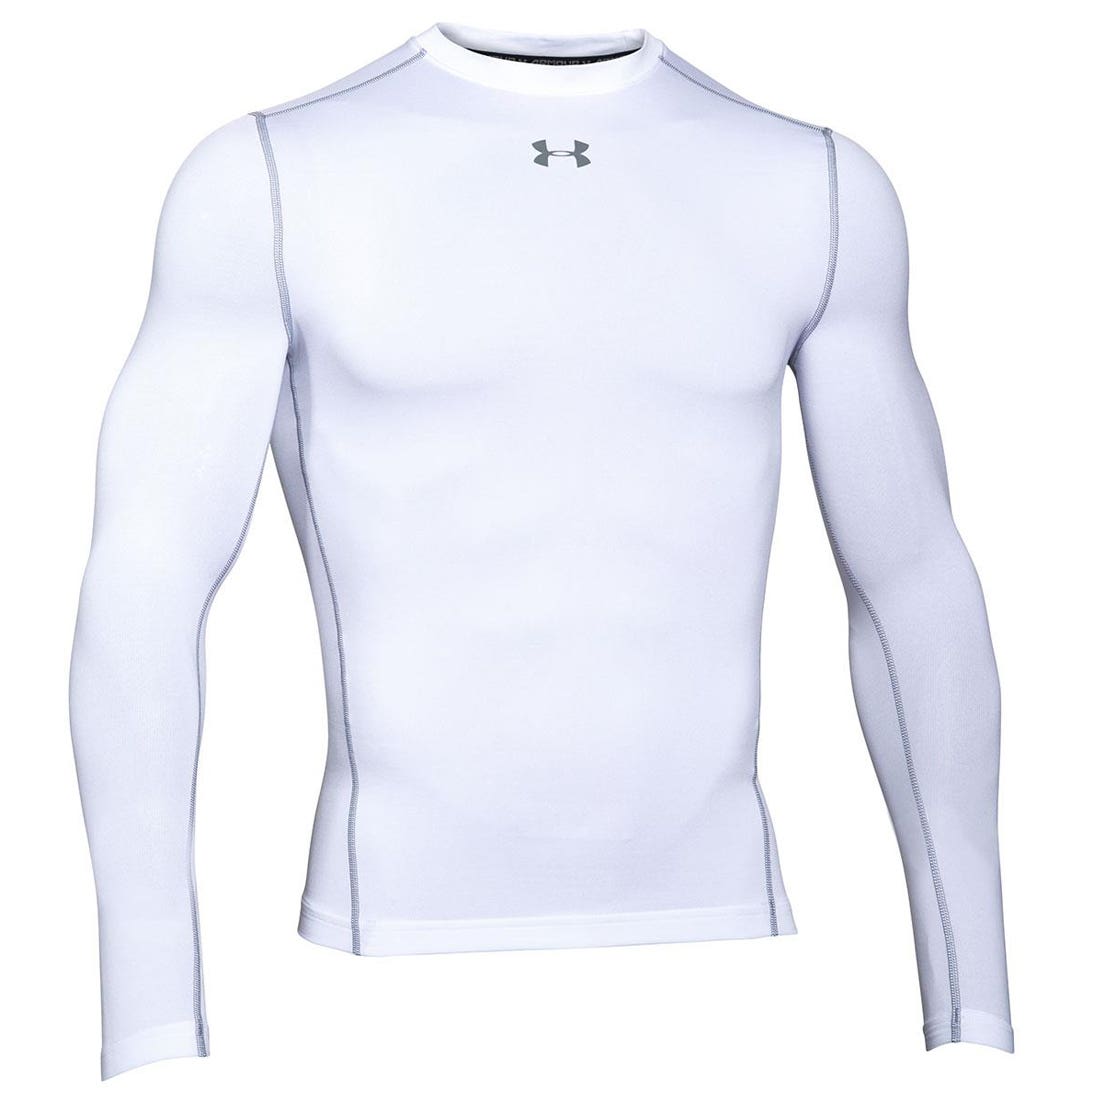 https://www.lacrosseunlimited.com/media/catalog/product/l/o/long-sleeve-ua-cg-white.jpg?optimize=high&fit=bounds&height=1120&width=1120